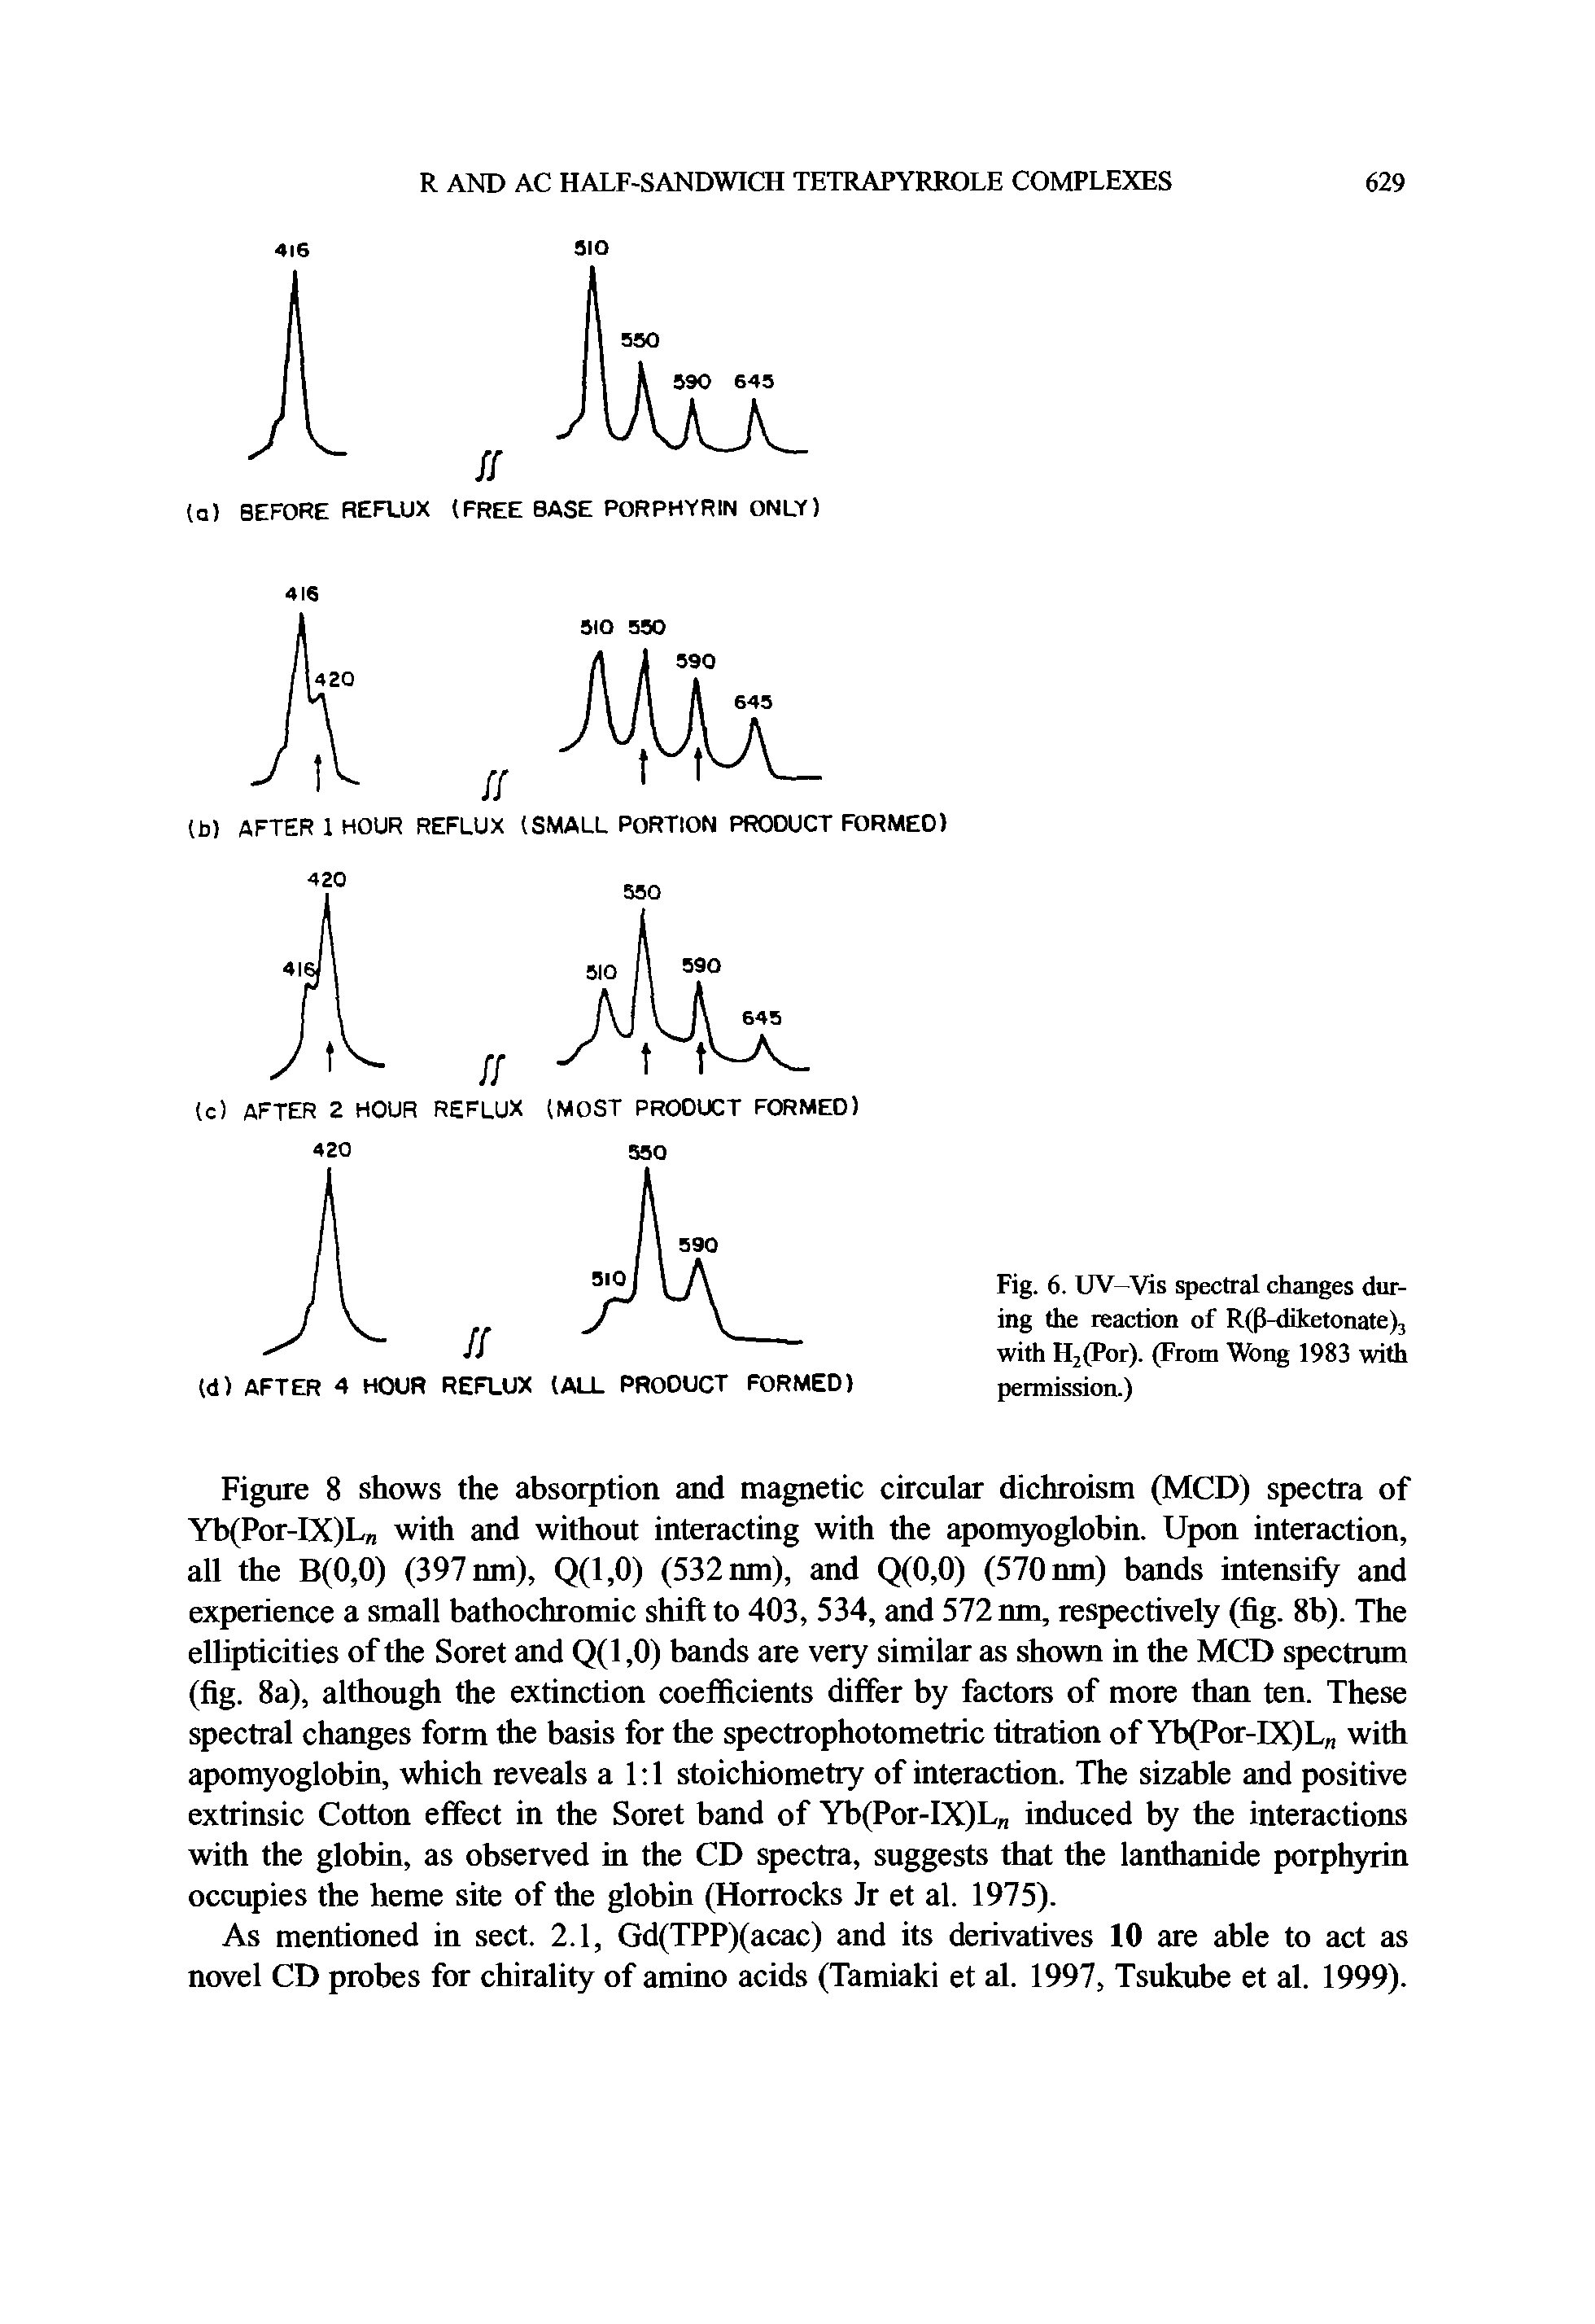 Fig. 6. UV-Vis spectral changes during the reaction of R(P-diketonate)3 with HjiPor). (From Wong 1983 with permission.)...